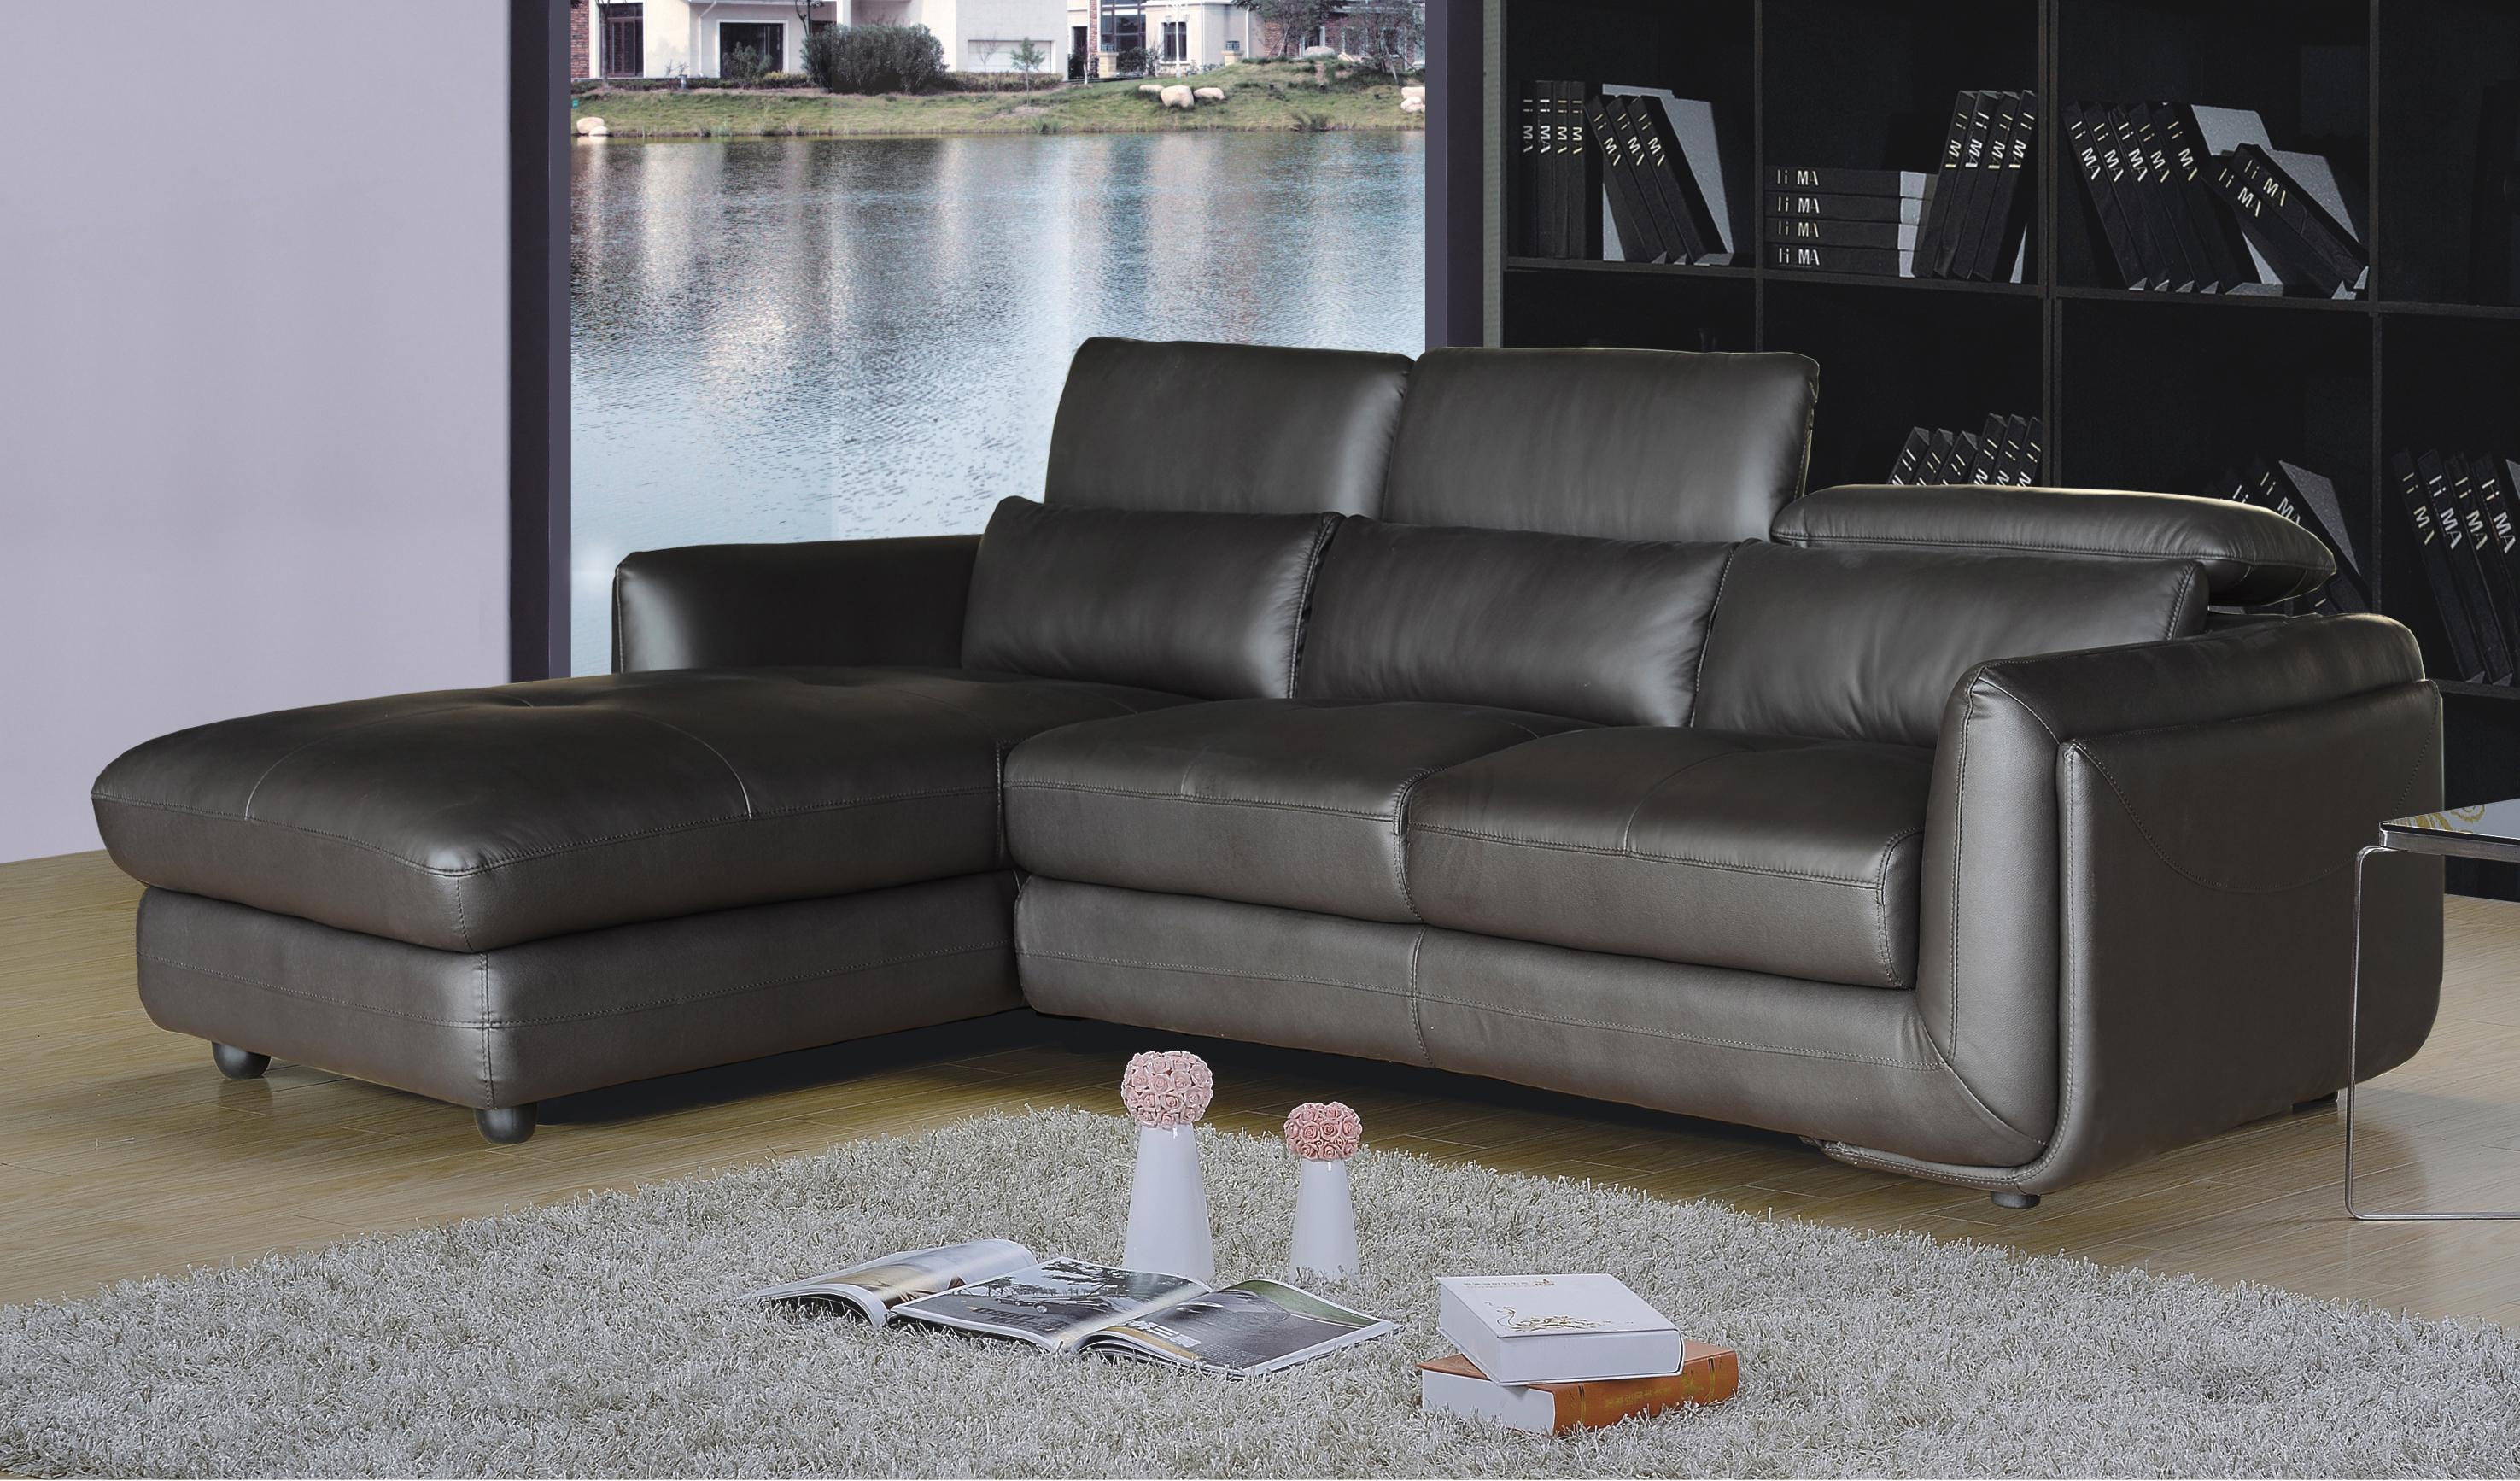 

    
AC Pacific Ron Grey Leather Match Sectional Sofa Left w/Adjustable Headrest
